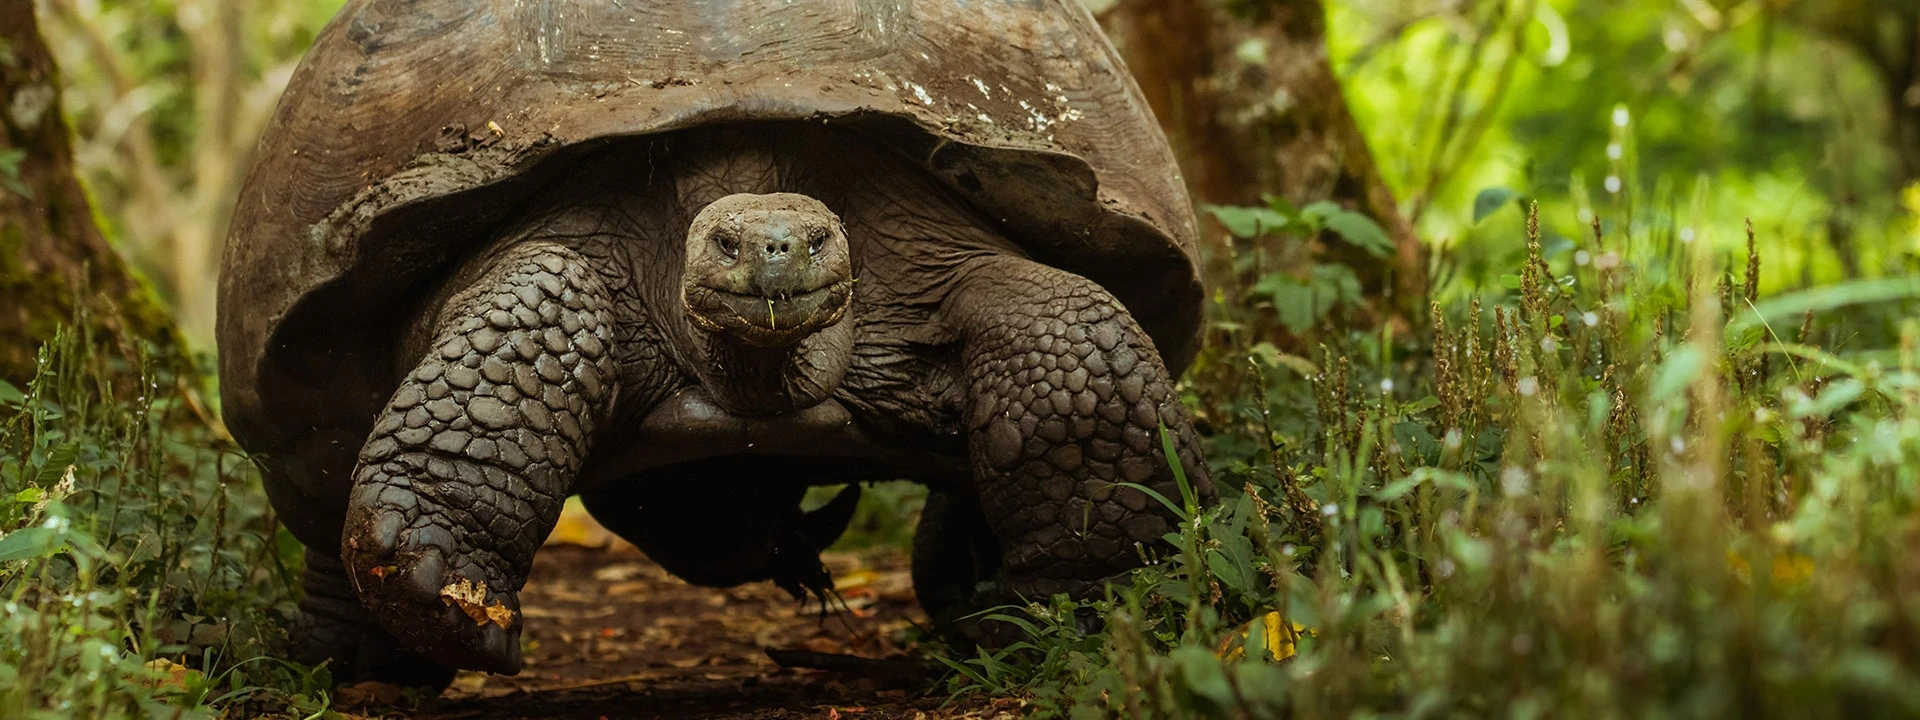 Galapagos giant tortoise in the jungle on the Galapagos Islands